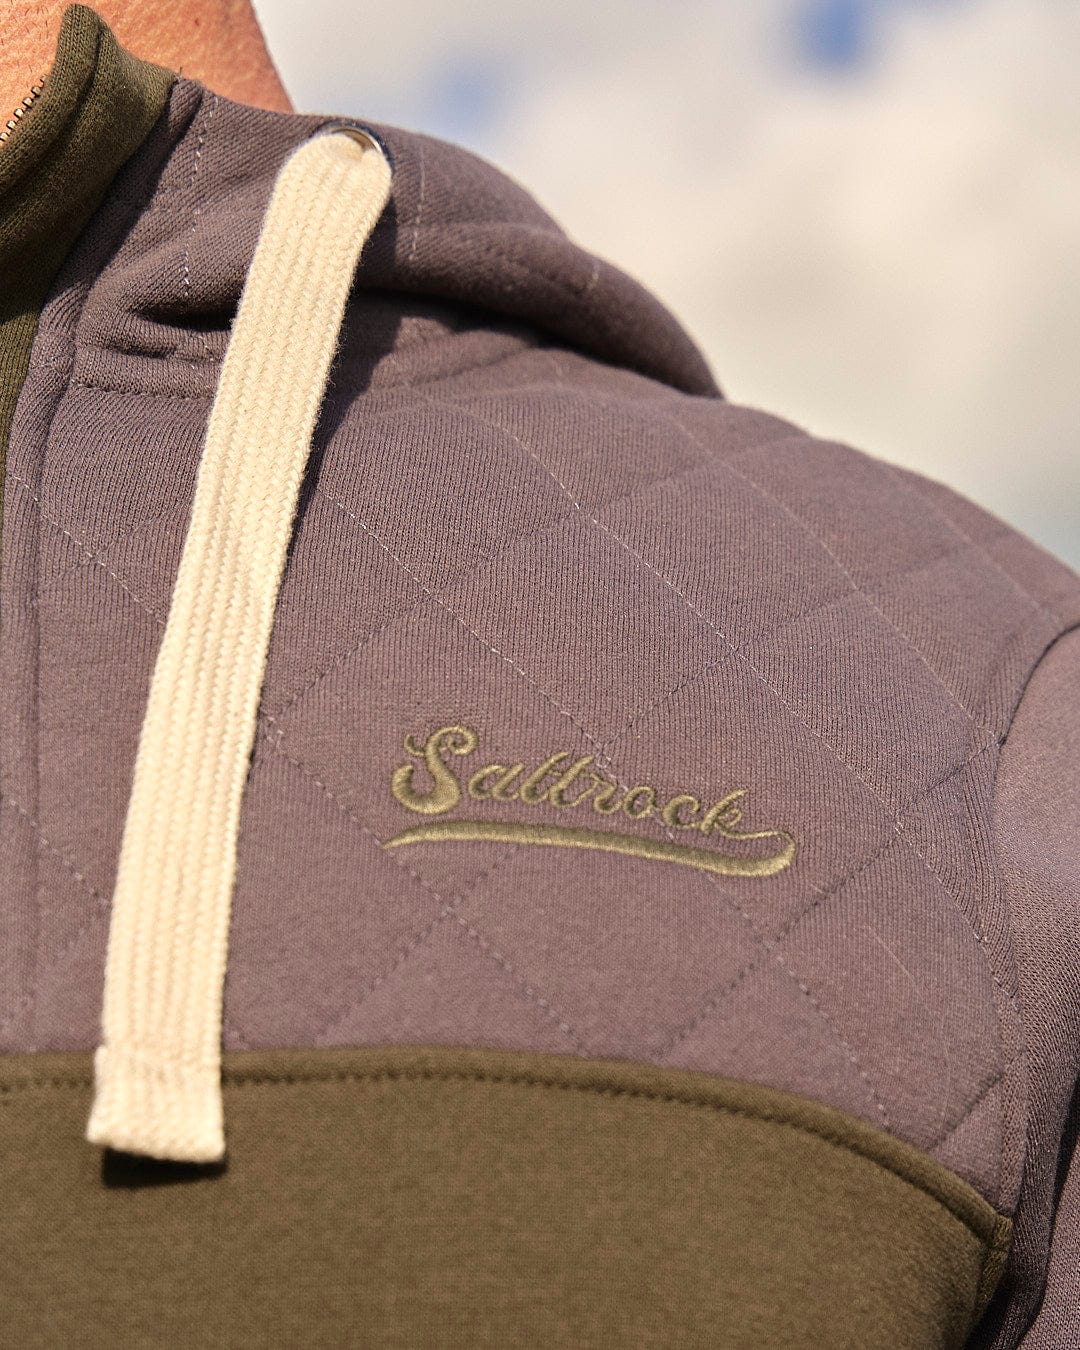 The Saltrock Aiken Mens 1/4 Neck Hoodie in Green provides warmth and comfort with a touch of style, featuring the word "seasox" on the back. Perfect for outdoor activities.